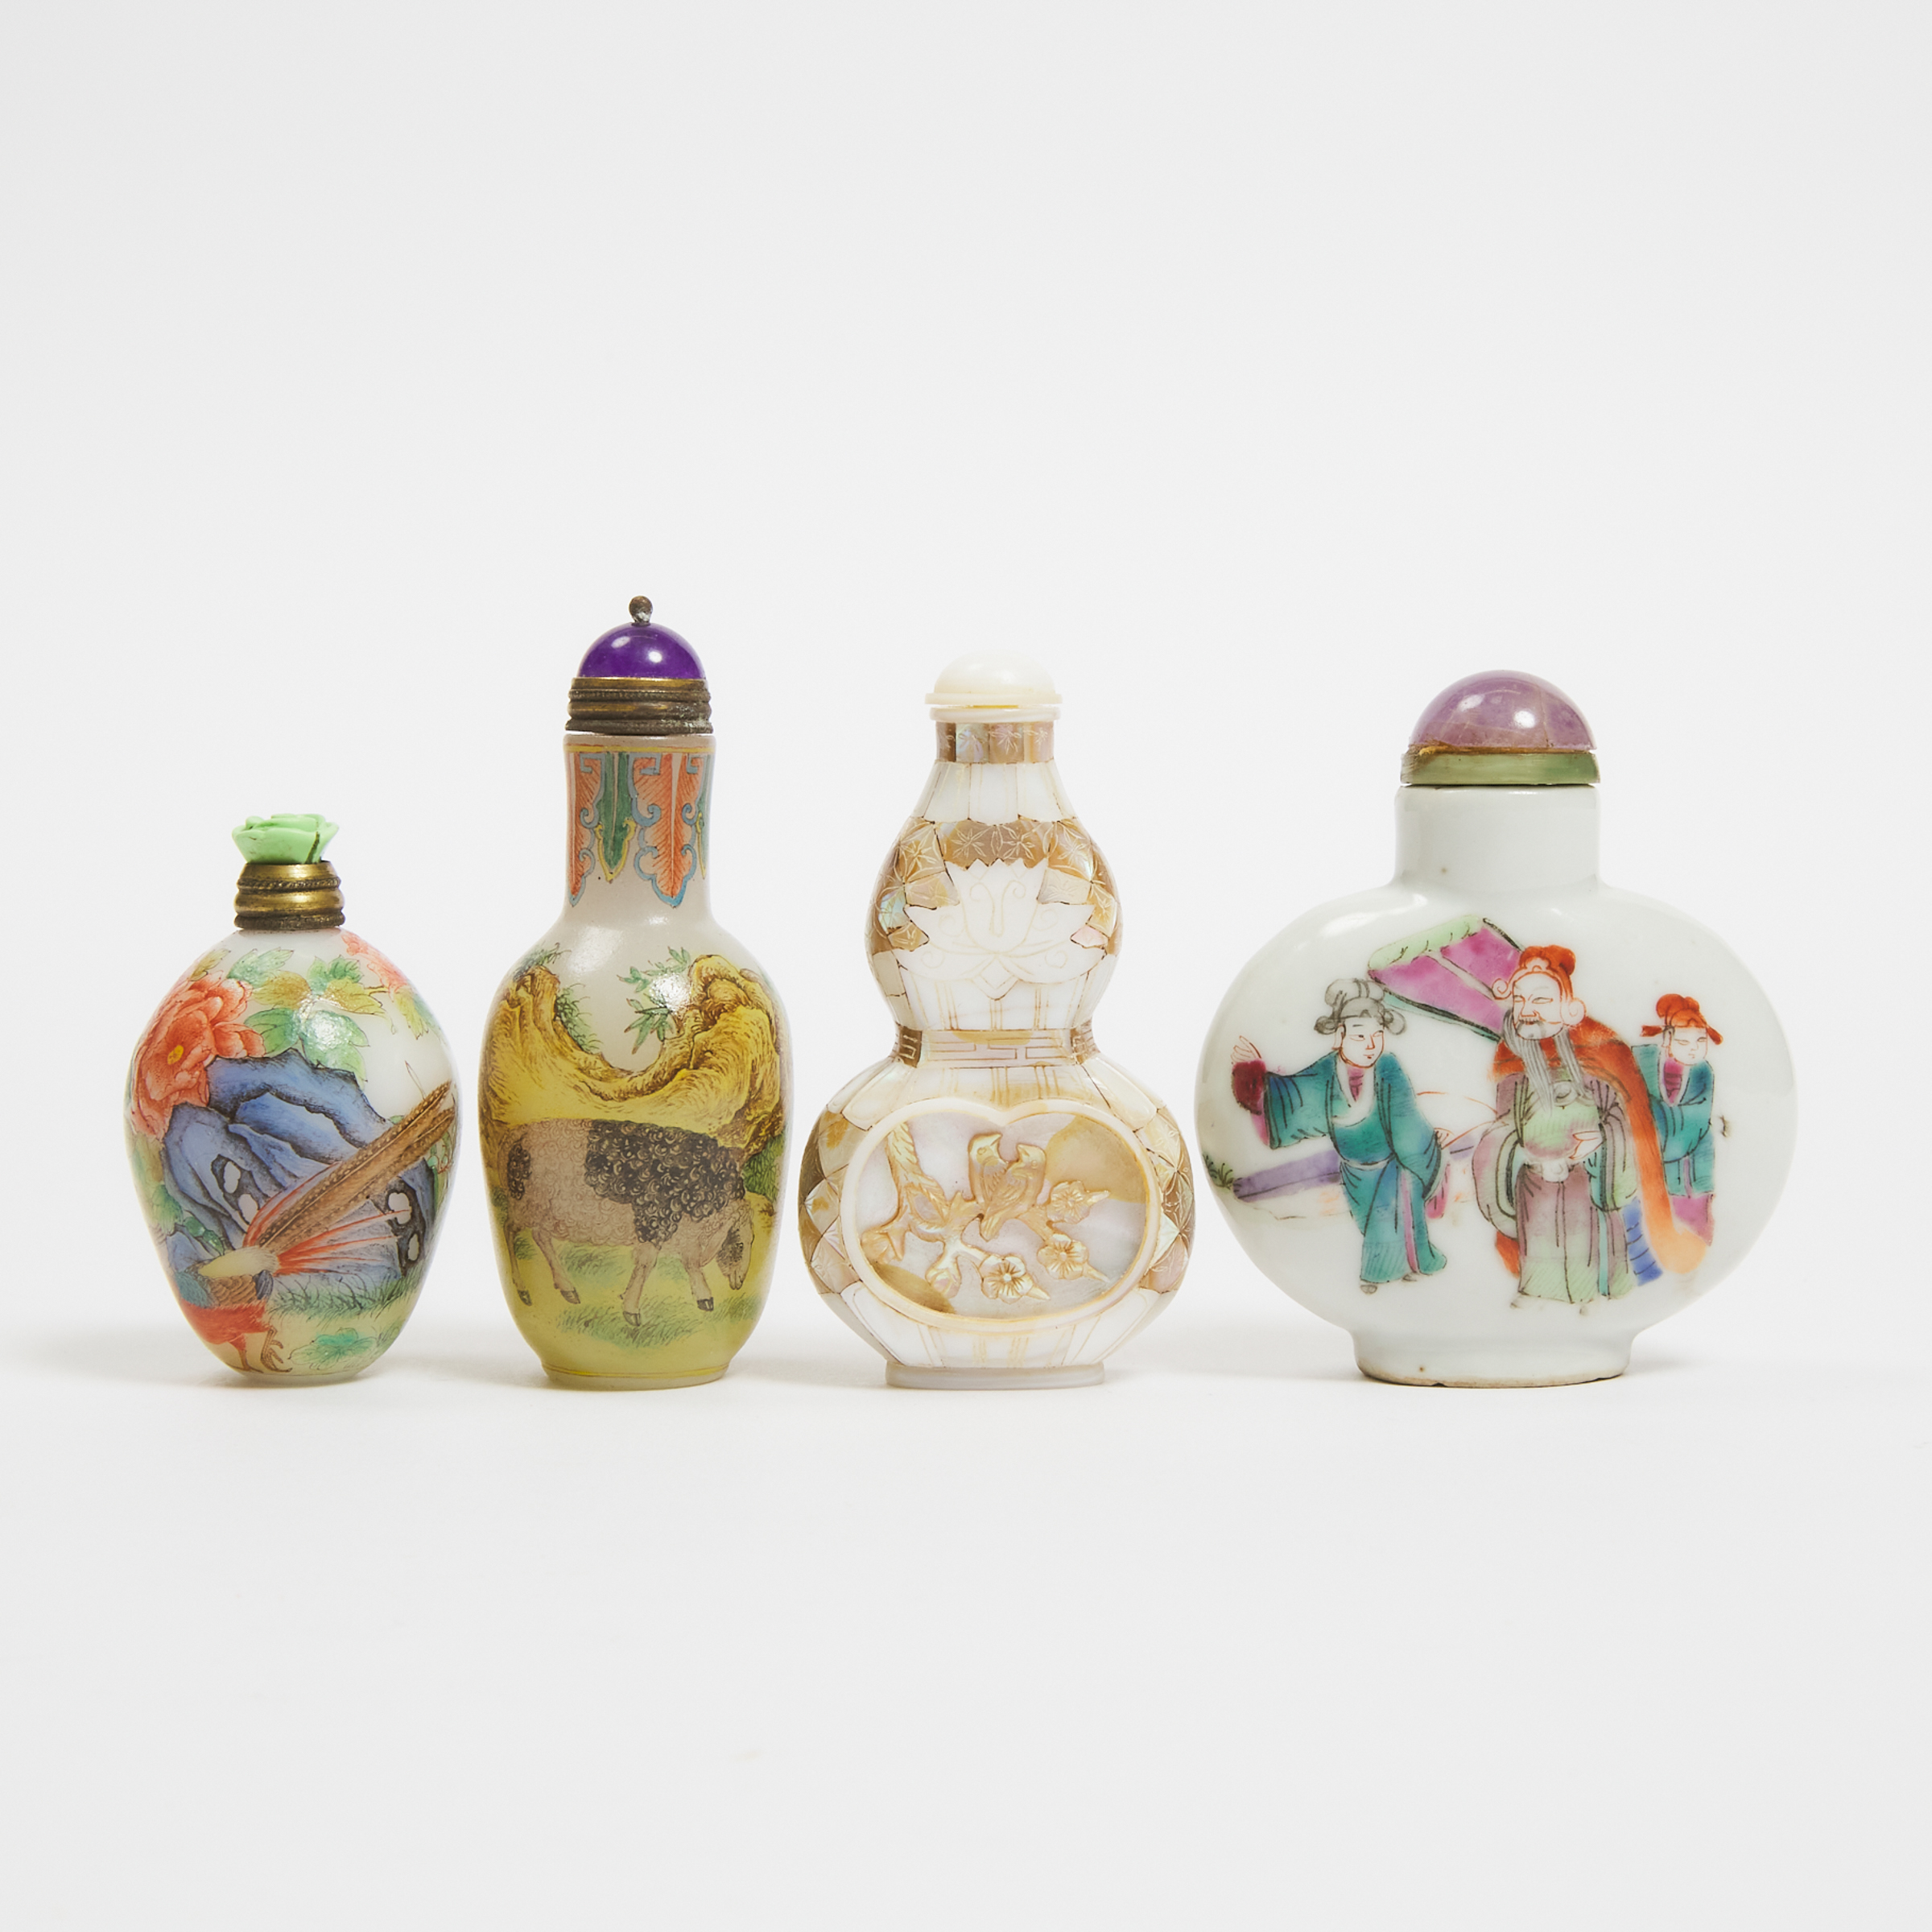 A Group of Four Snuff Bottles, 19th Century and Later